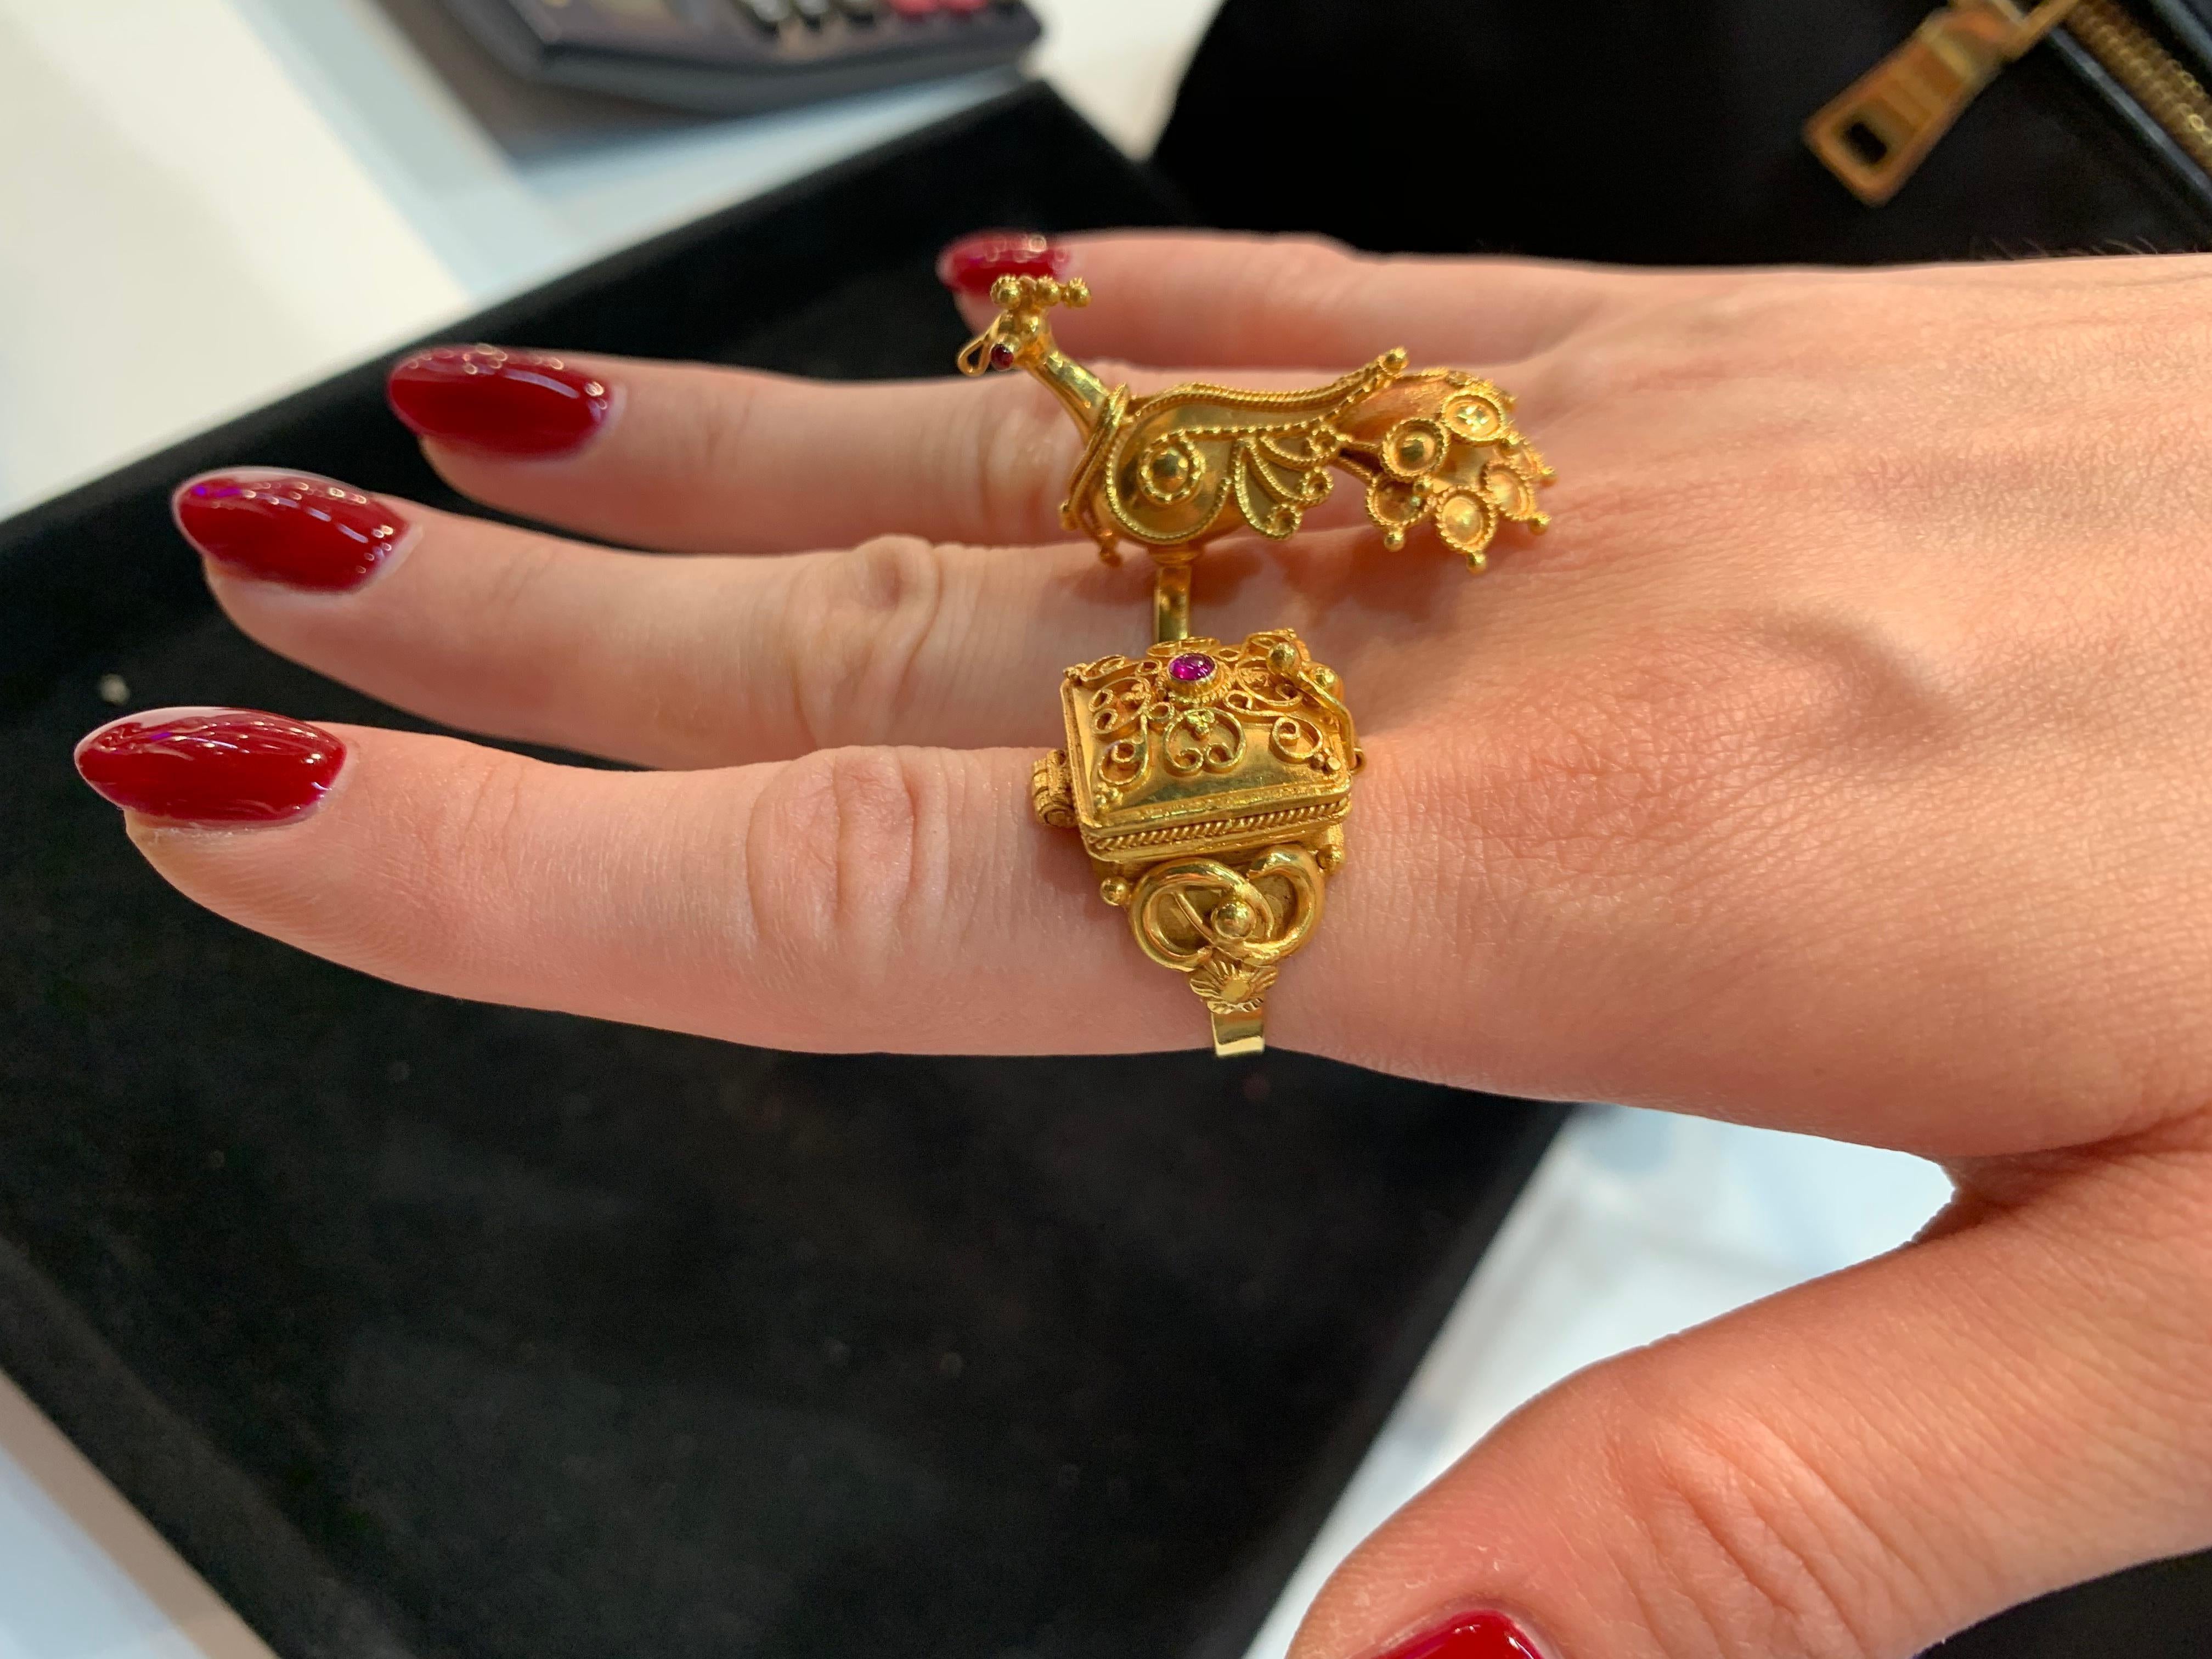 Bochic Vintage Gold Poison ring and Bochic vintage peacock ring. 
It’s chic and its functional.
Size can me made to fit. 
There are lots of names for poison rings – secret, pillbox, compartment, locket or vessel rings – but historically they all